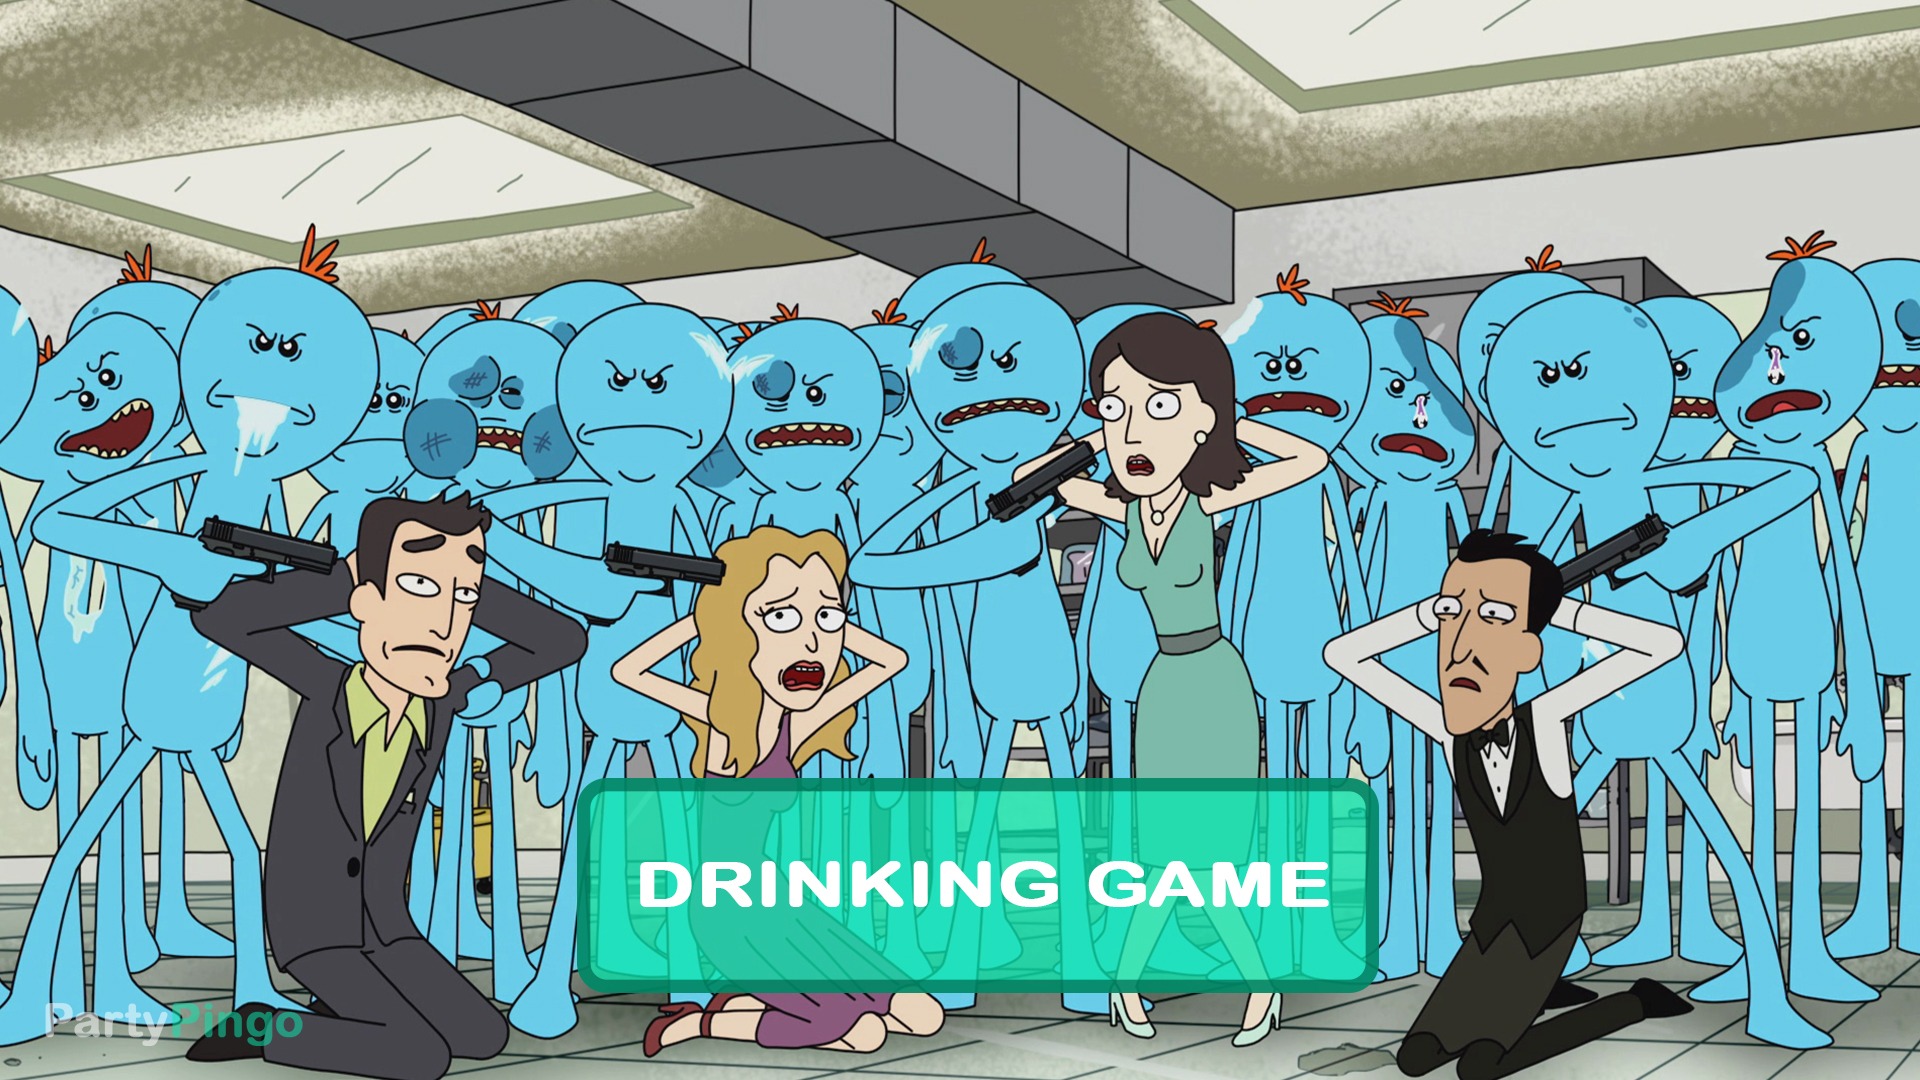 Rick and Morty - Meeseeks and Destroy Drinking Game